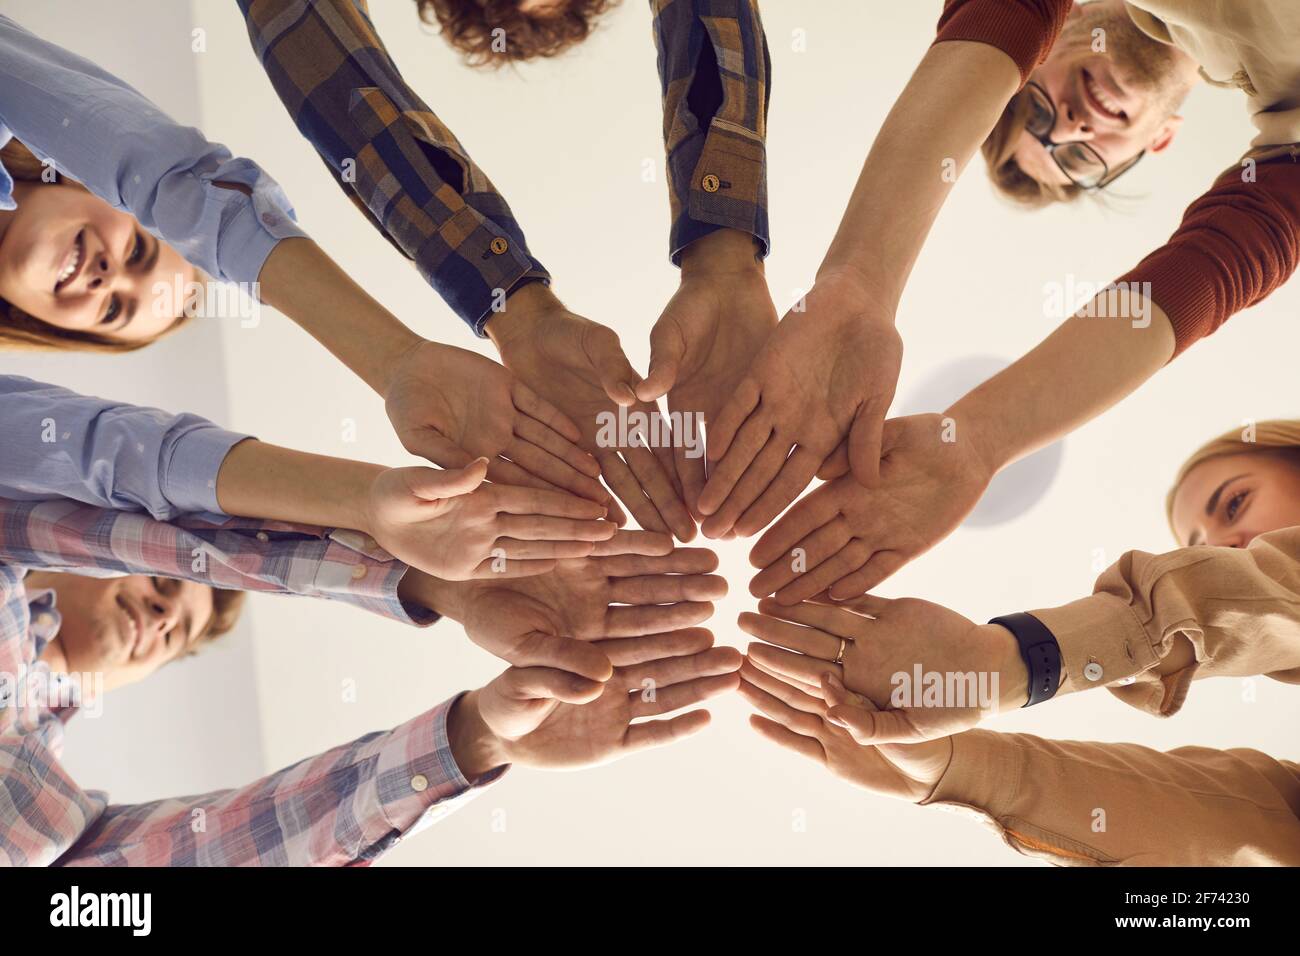 Close up bottom view of people putting hands together standing in circle Stock Photo